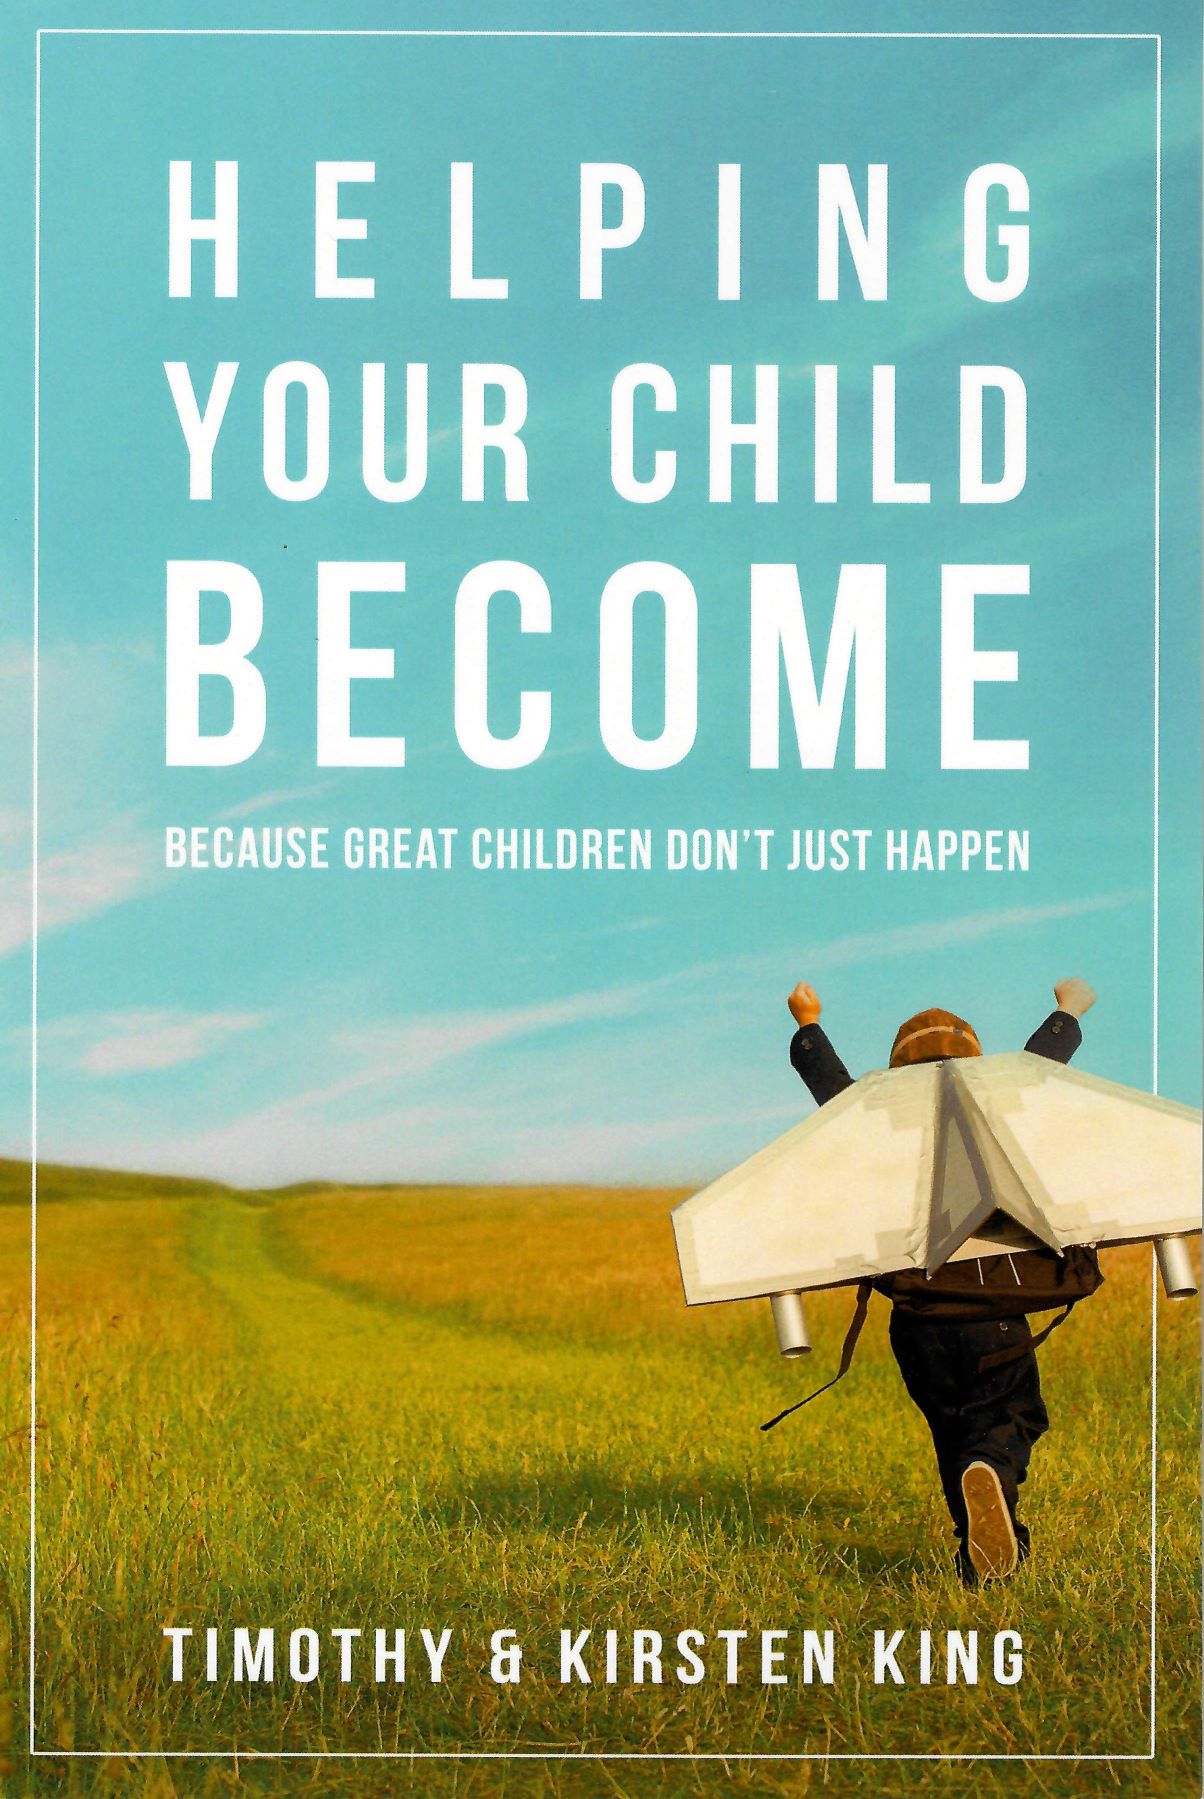 Helping Your Child Become - Tim & Kirsten King